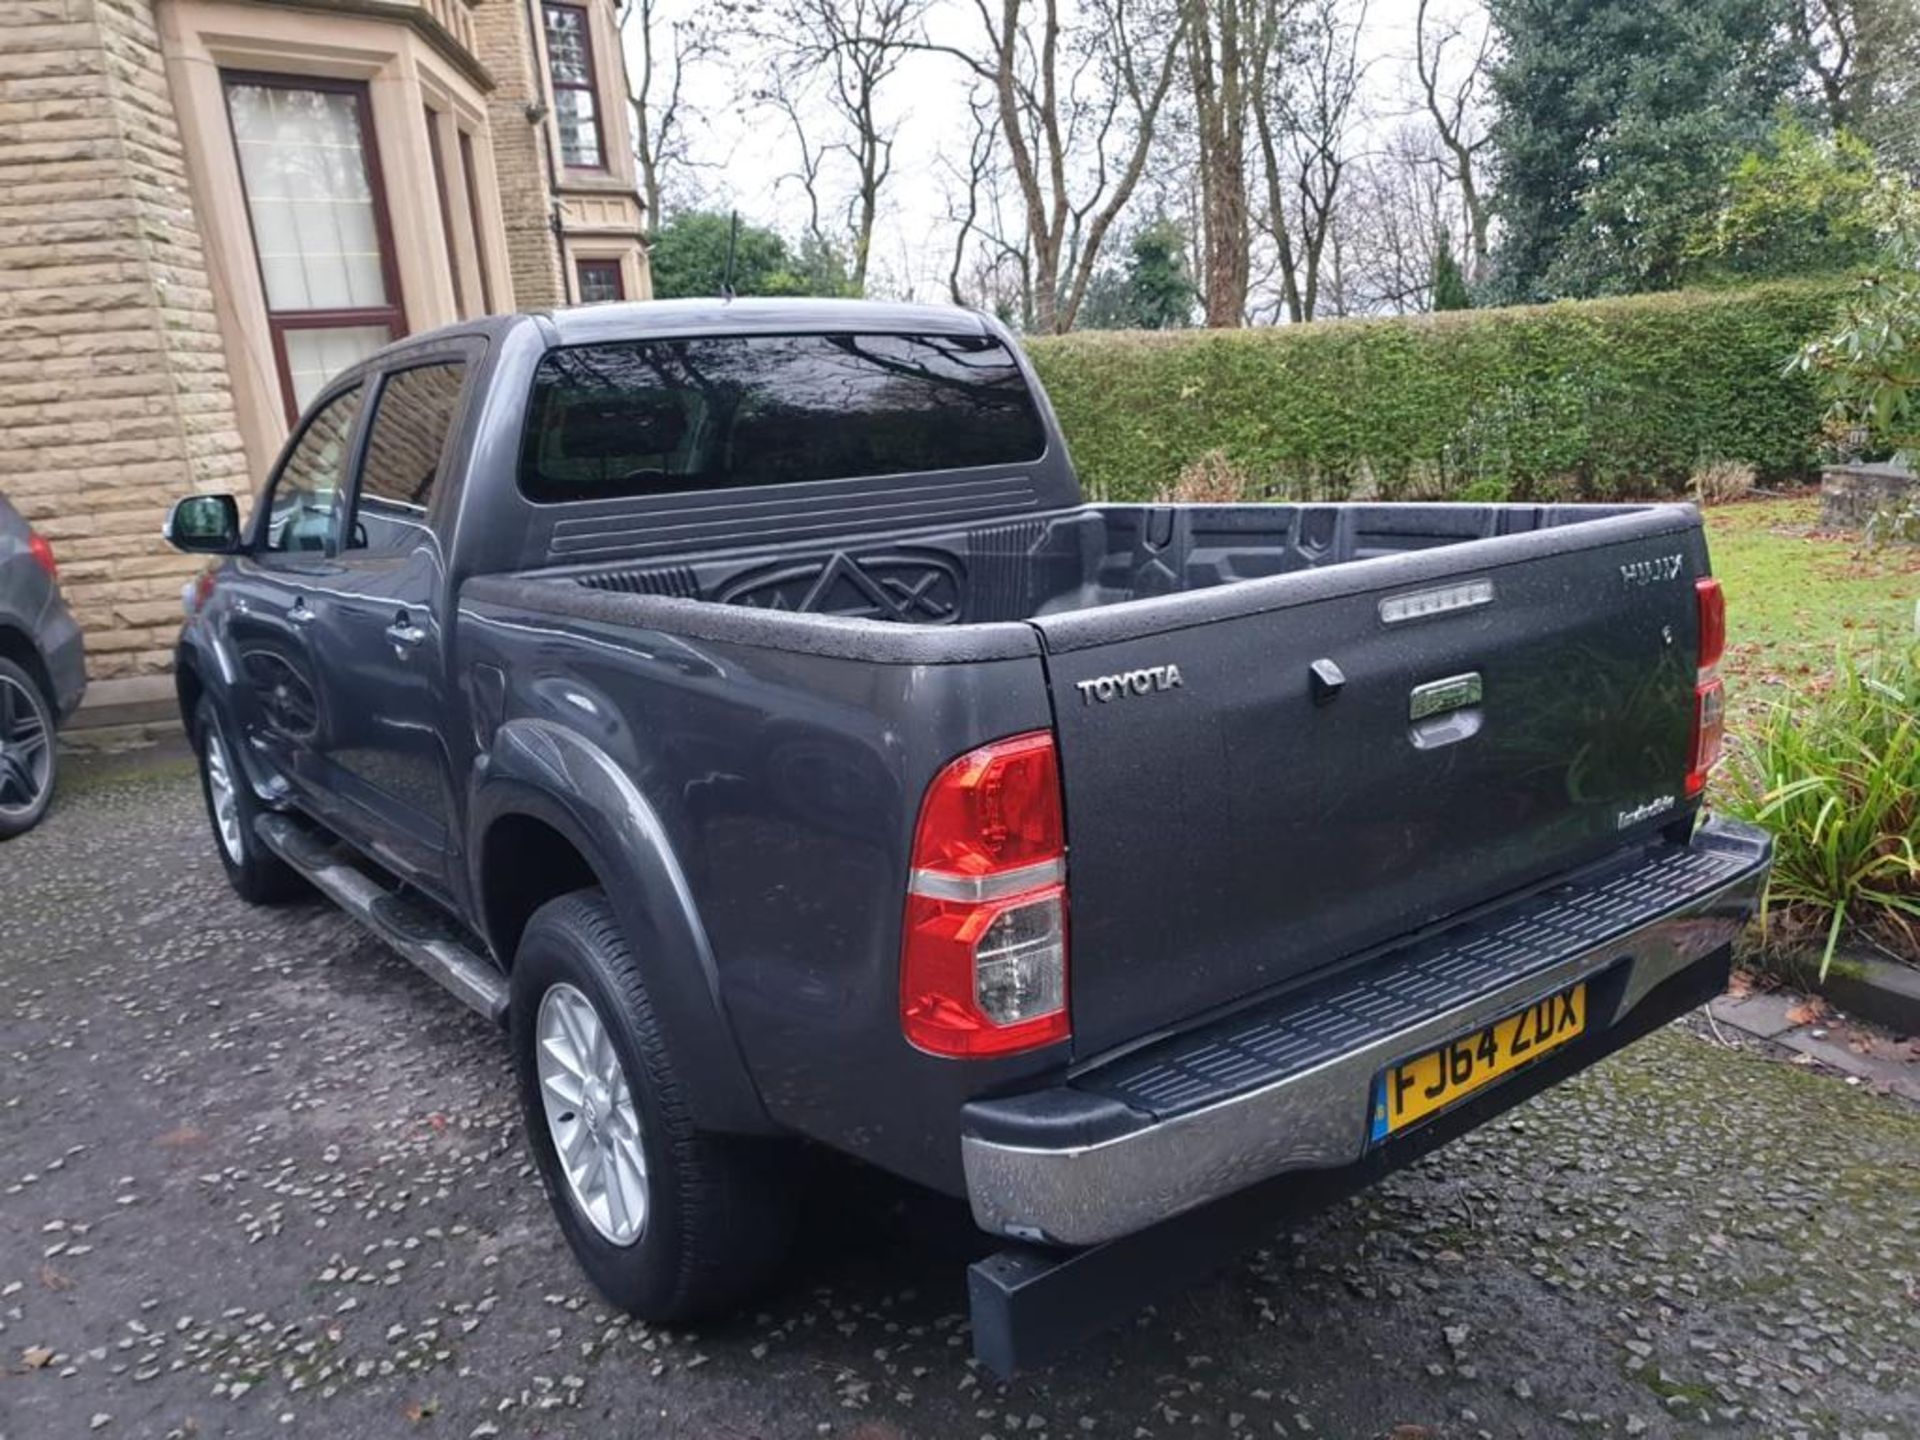 2015/64 REG TOYOTA HILUX INVINCIBLE D-4D 4X4 GREY DIESEL LIGHT UTILITY, SHOWING 1 FORMER KEEPER - Image 5 of 11